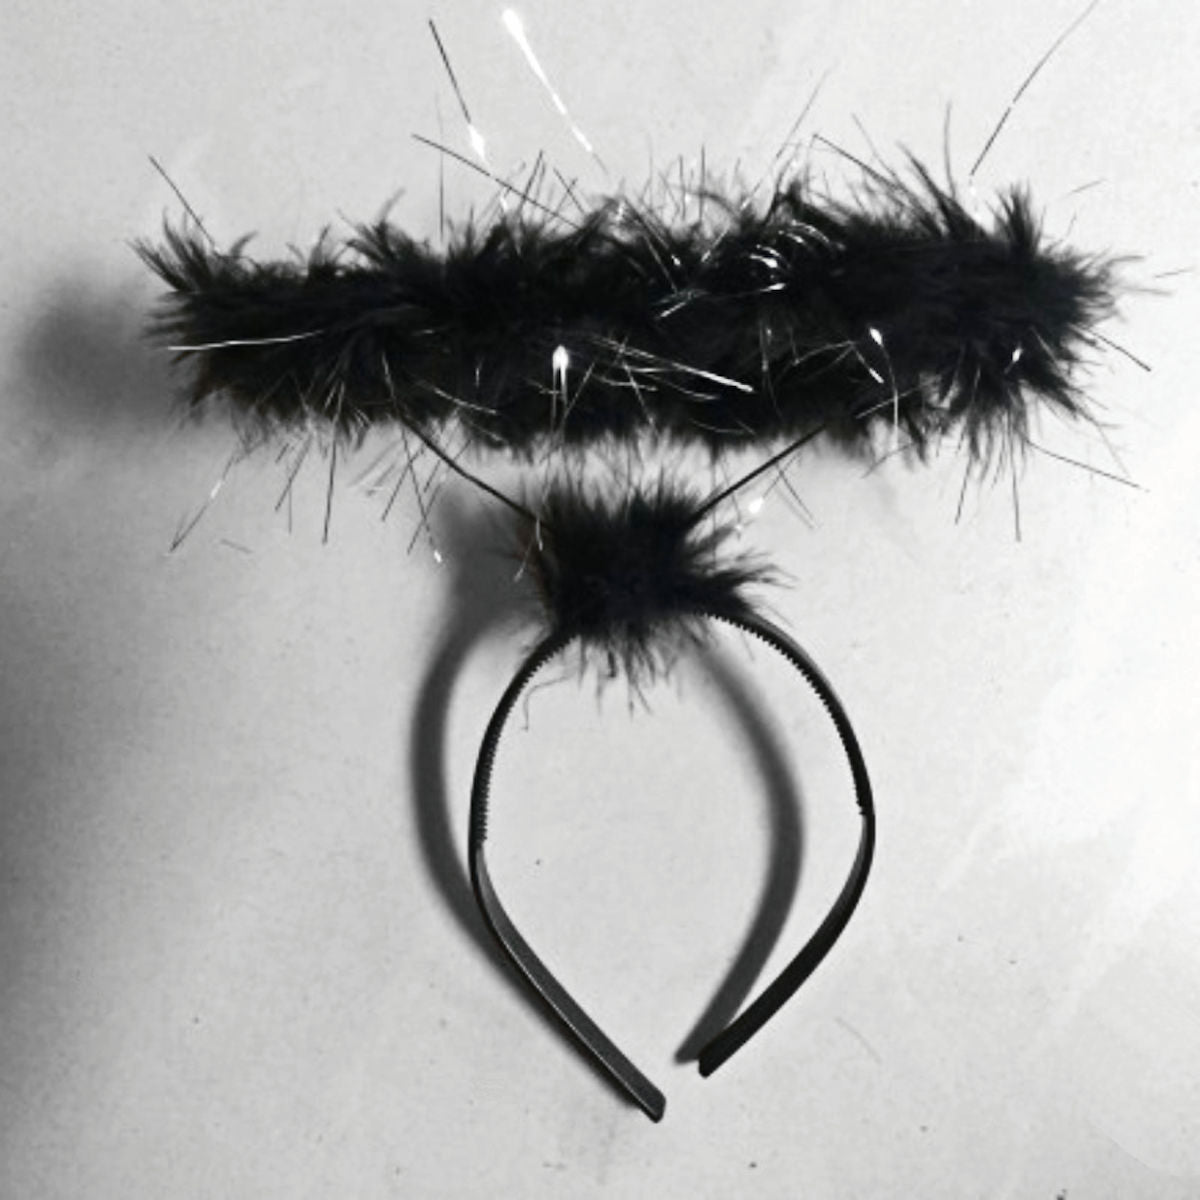 Large Black Angel Halo Marabou with Silver on headband Costume accessory